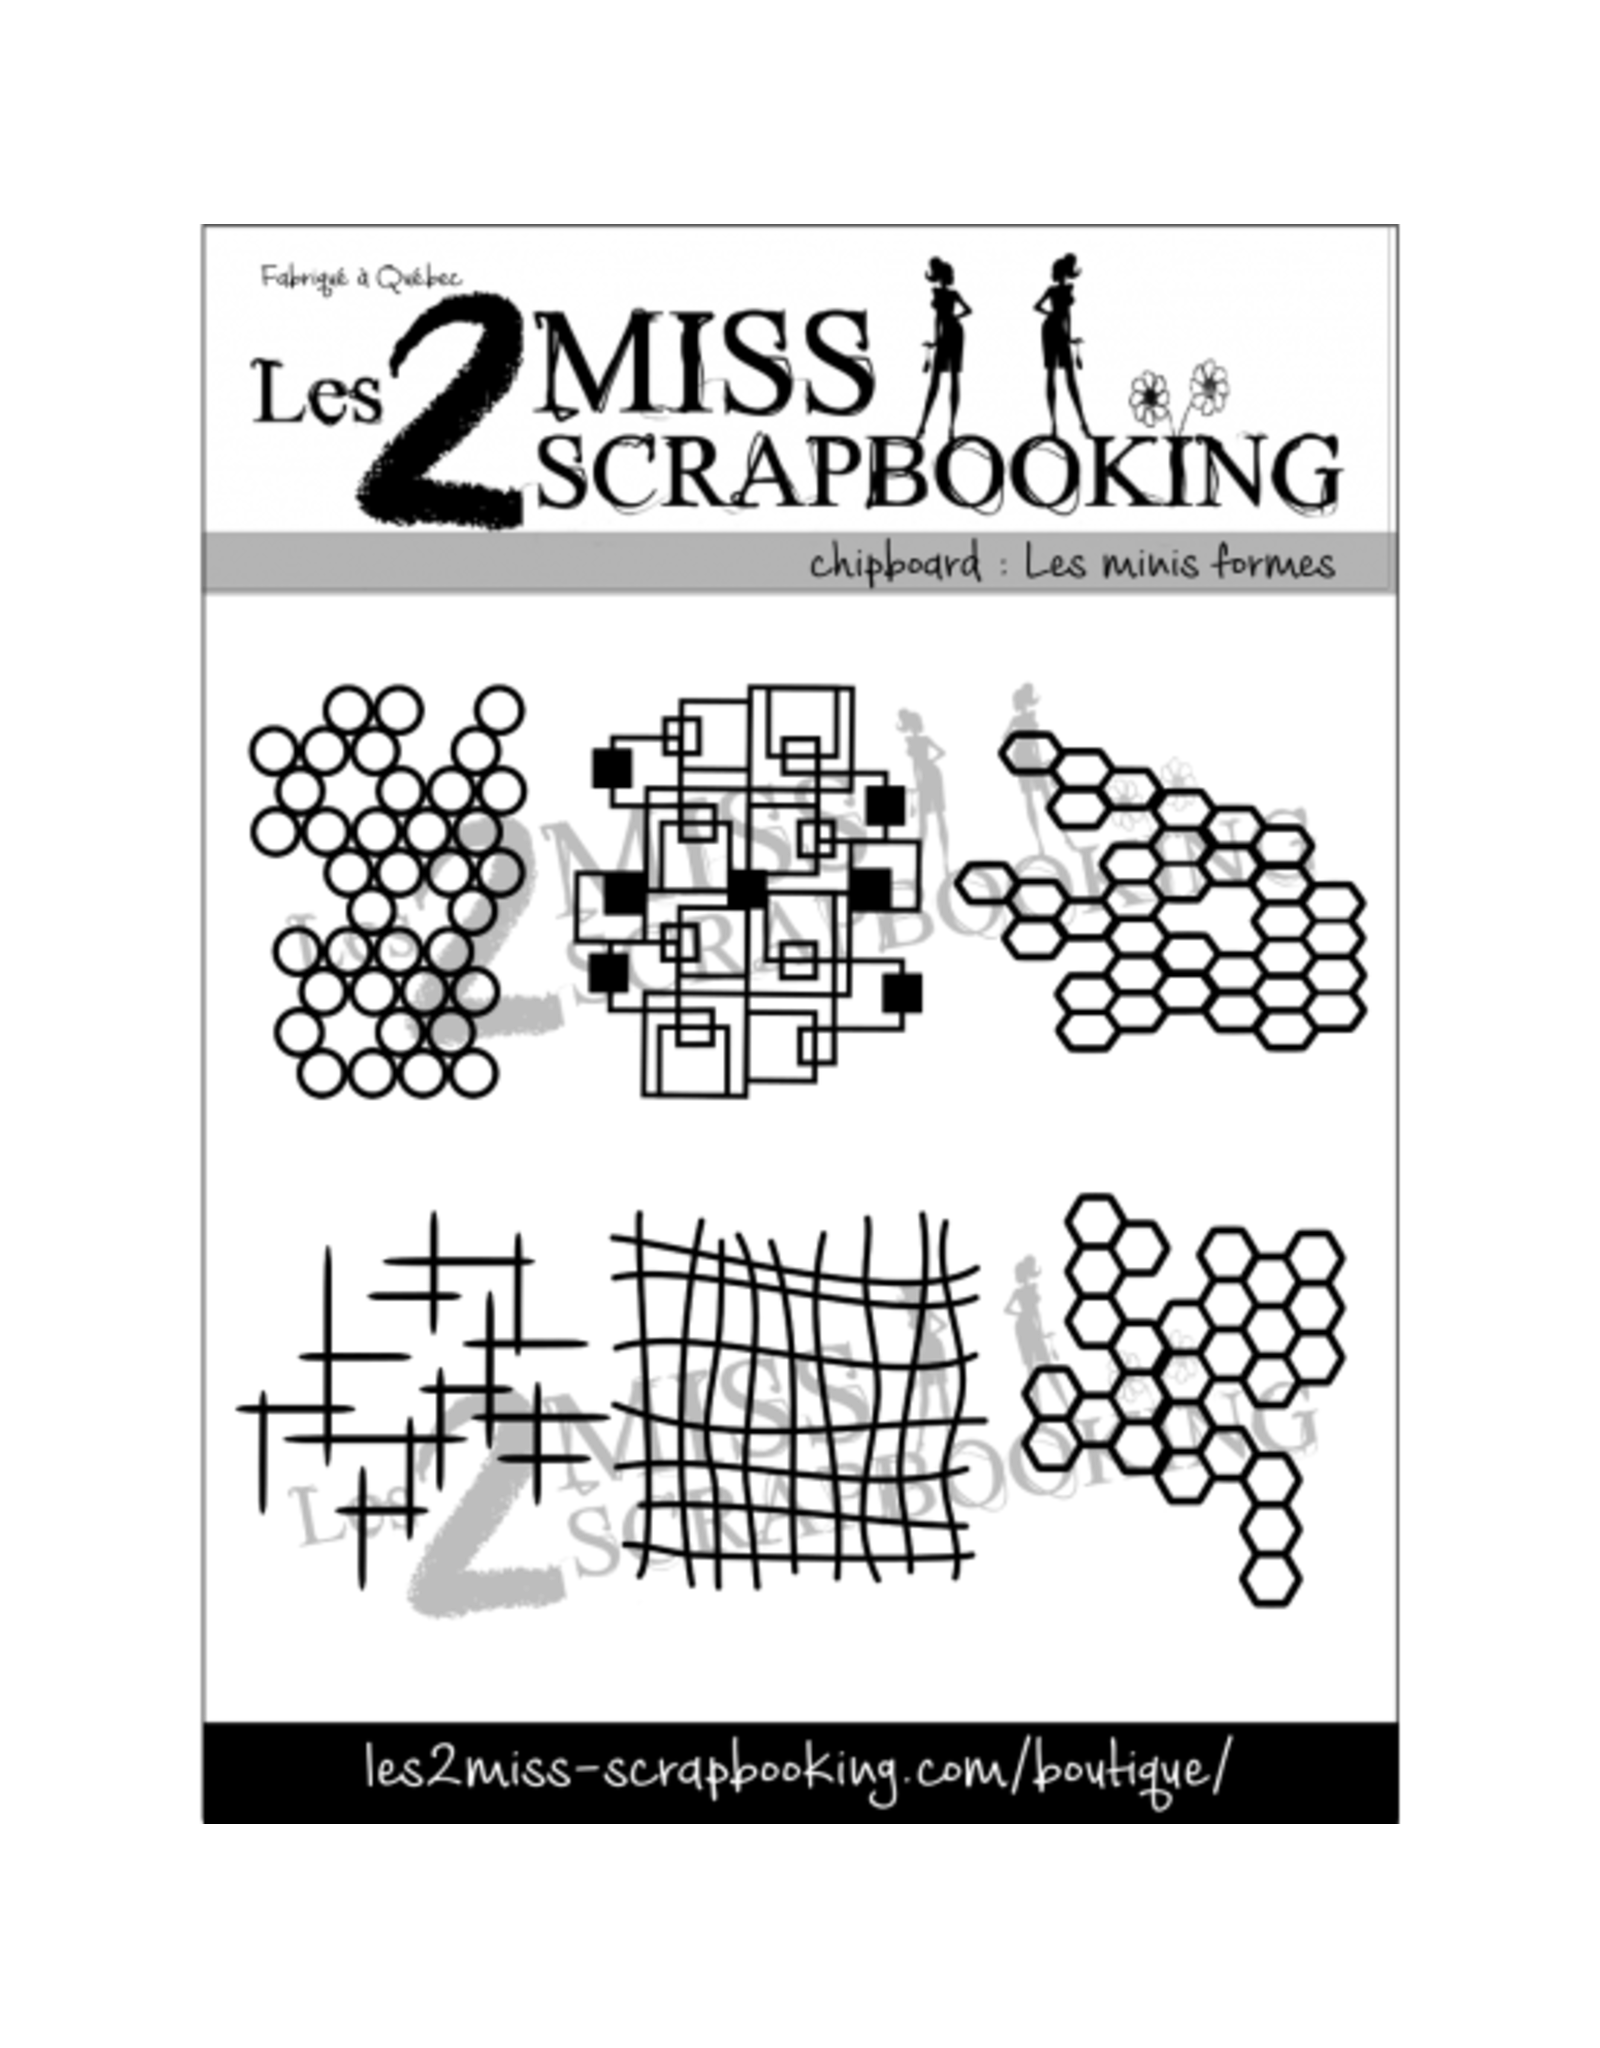 LES 2 MISS SCRAPBOOKING LES 2 MISS SCRAPBOOKING LES MINIS FORMES CHIPBOARD